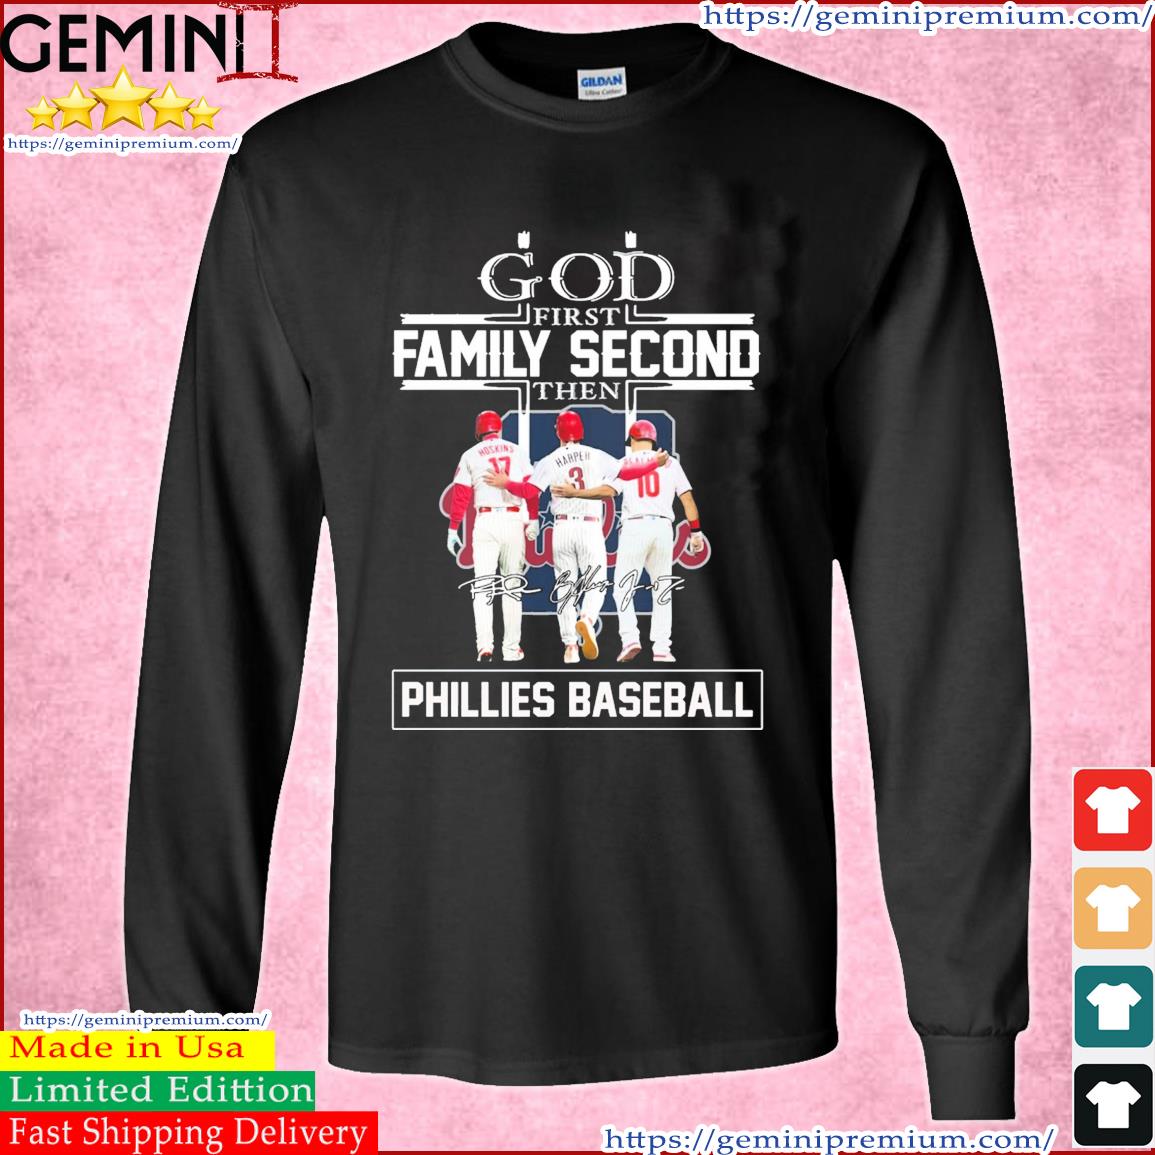 God Family Second First Then Hoskins Harper And Realmuto Phillies Baseball Signatures Shirt Long Sleeve Tee